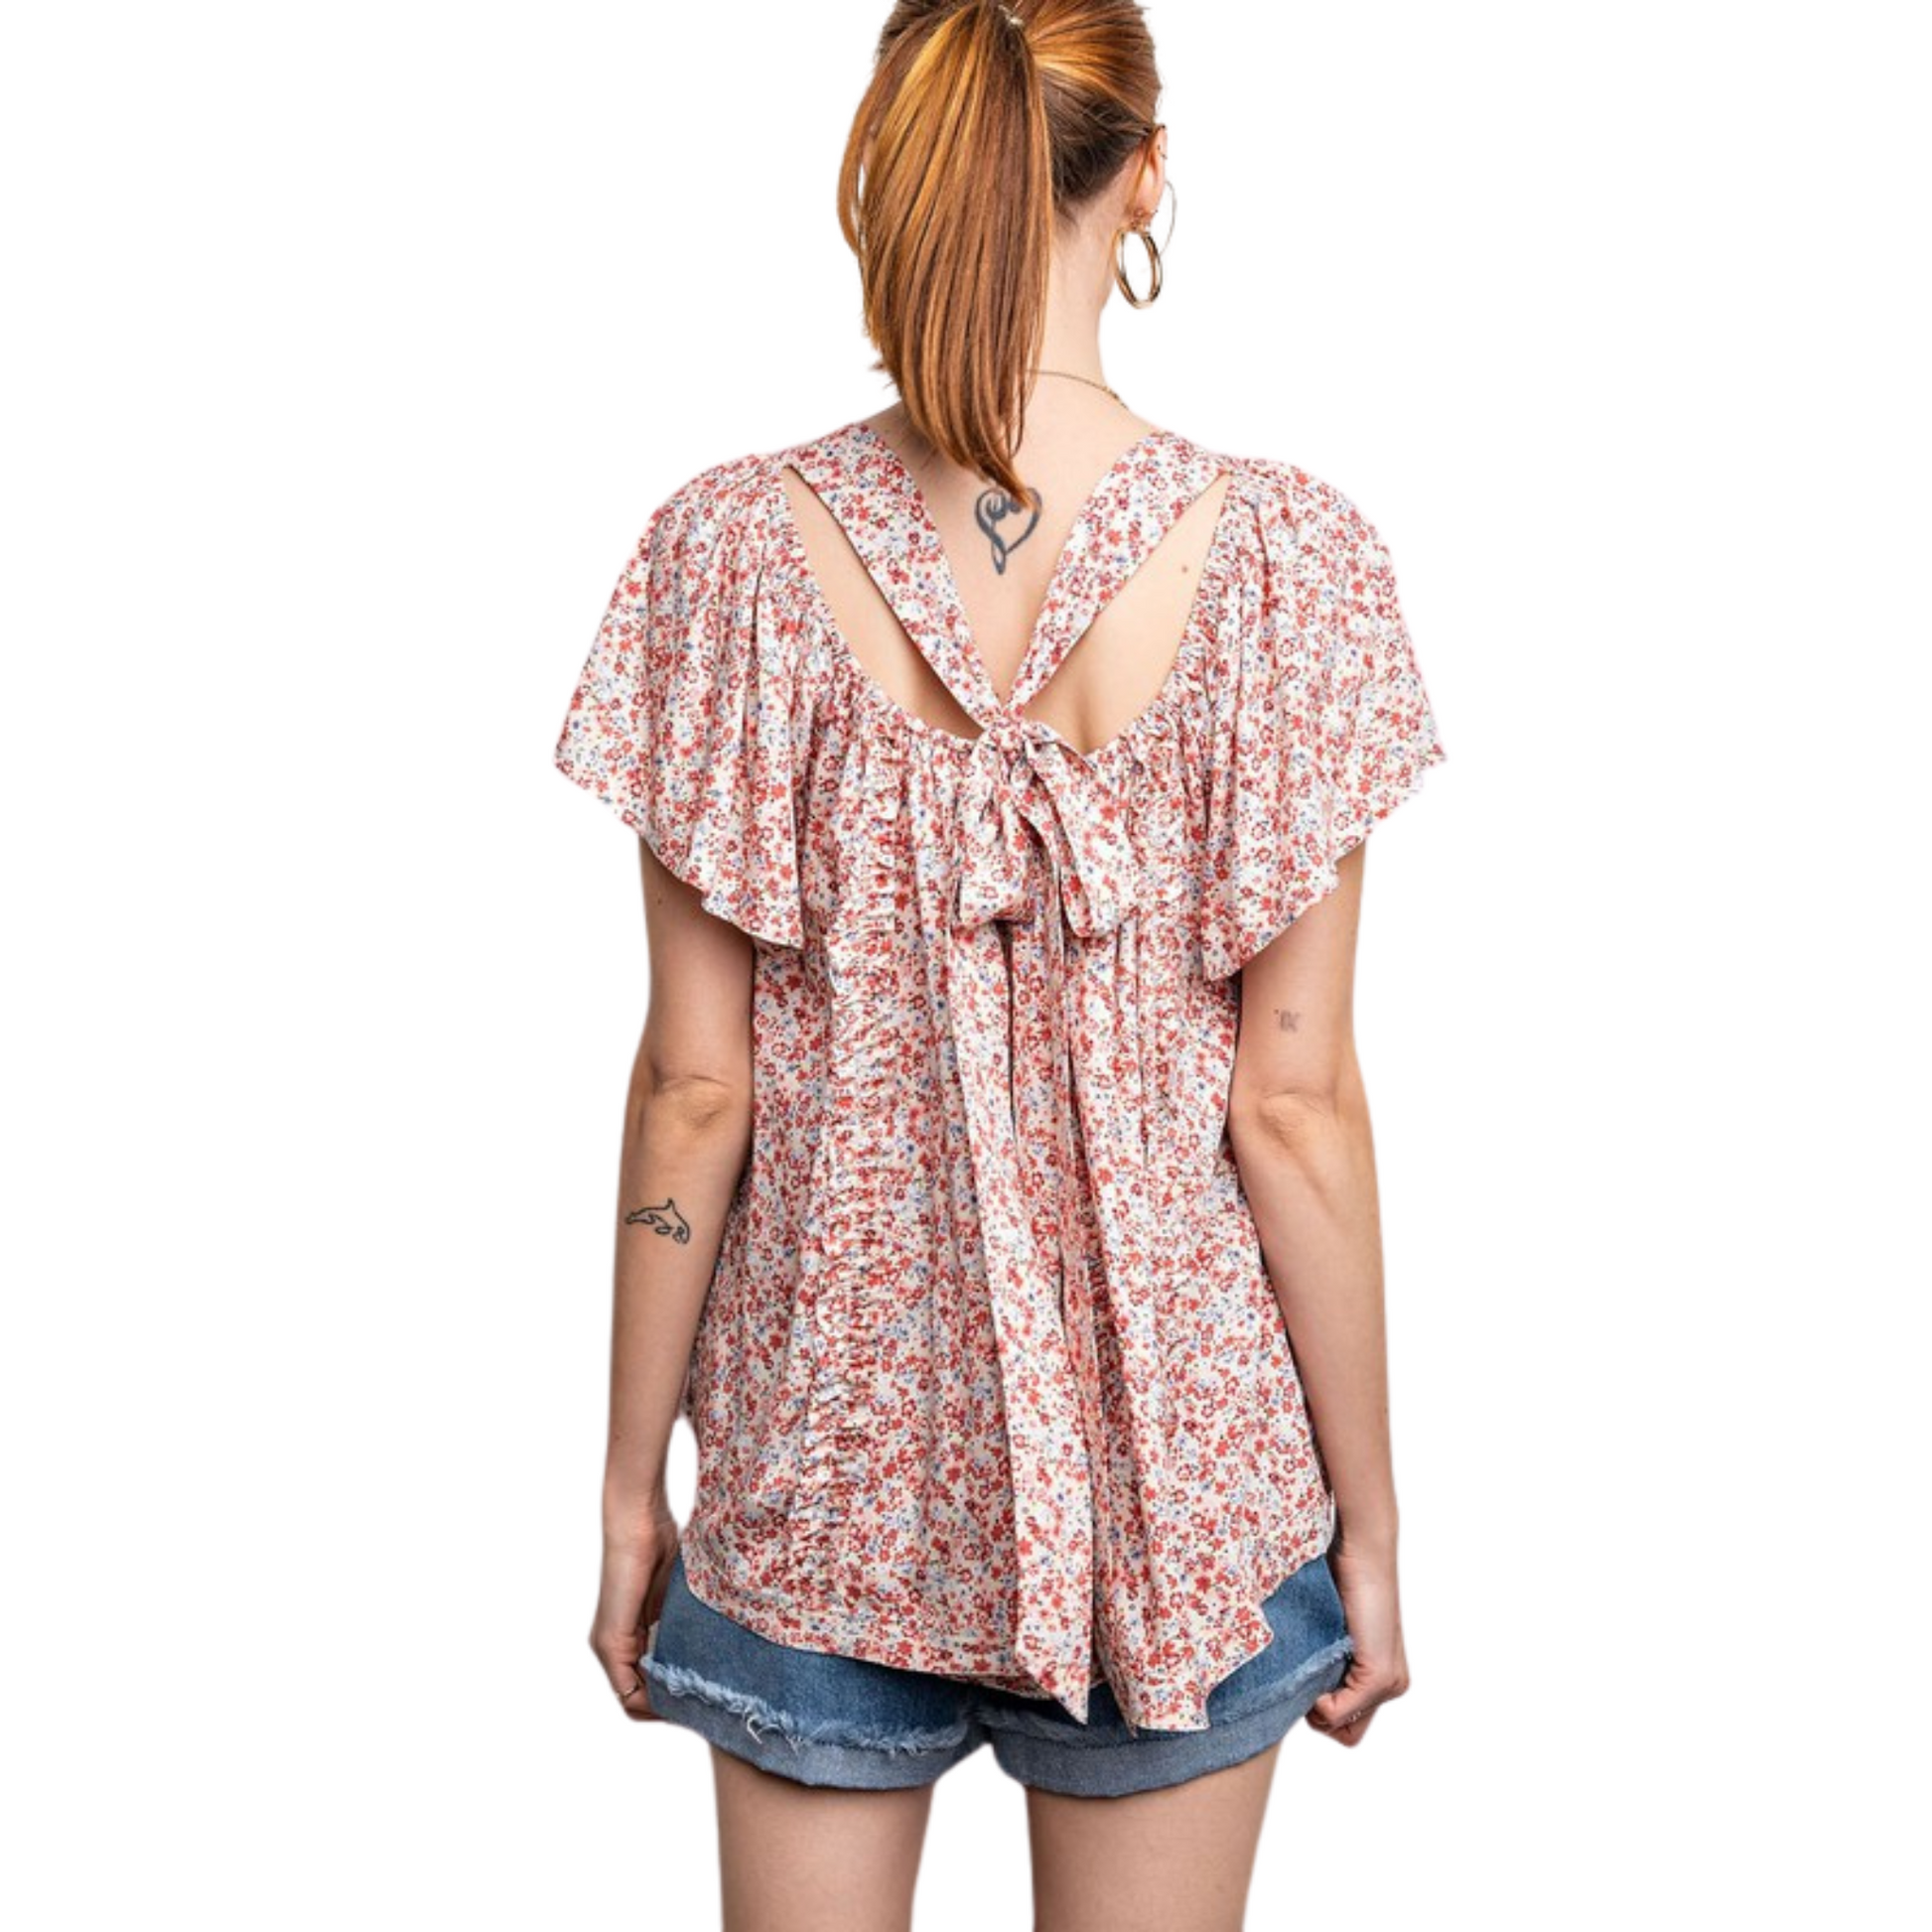 This Floral Printed Rayon Top is an effortless style edition to your wardrobe. It features a beautiful floral print on a lightweight rayon fabric, short sleeves, and a tie back to adjust the fit. The perfect top to keep you comfortable and stylish.